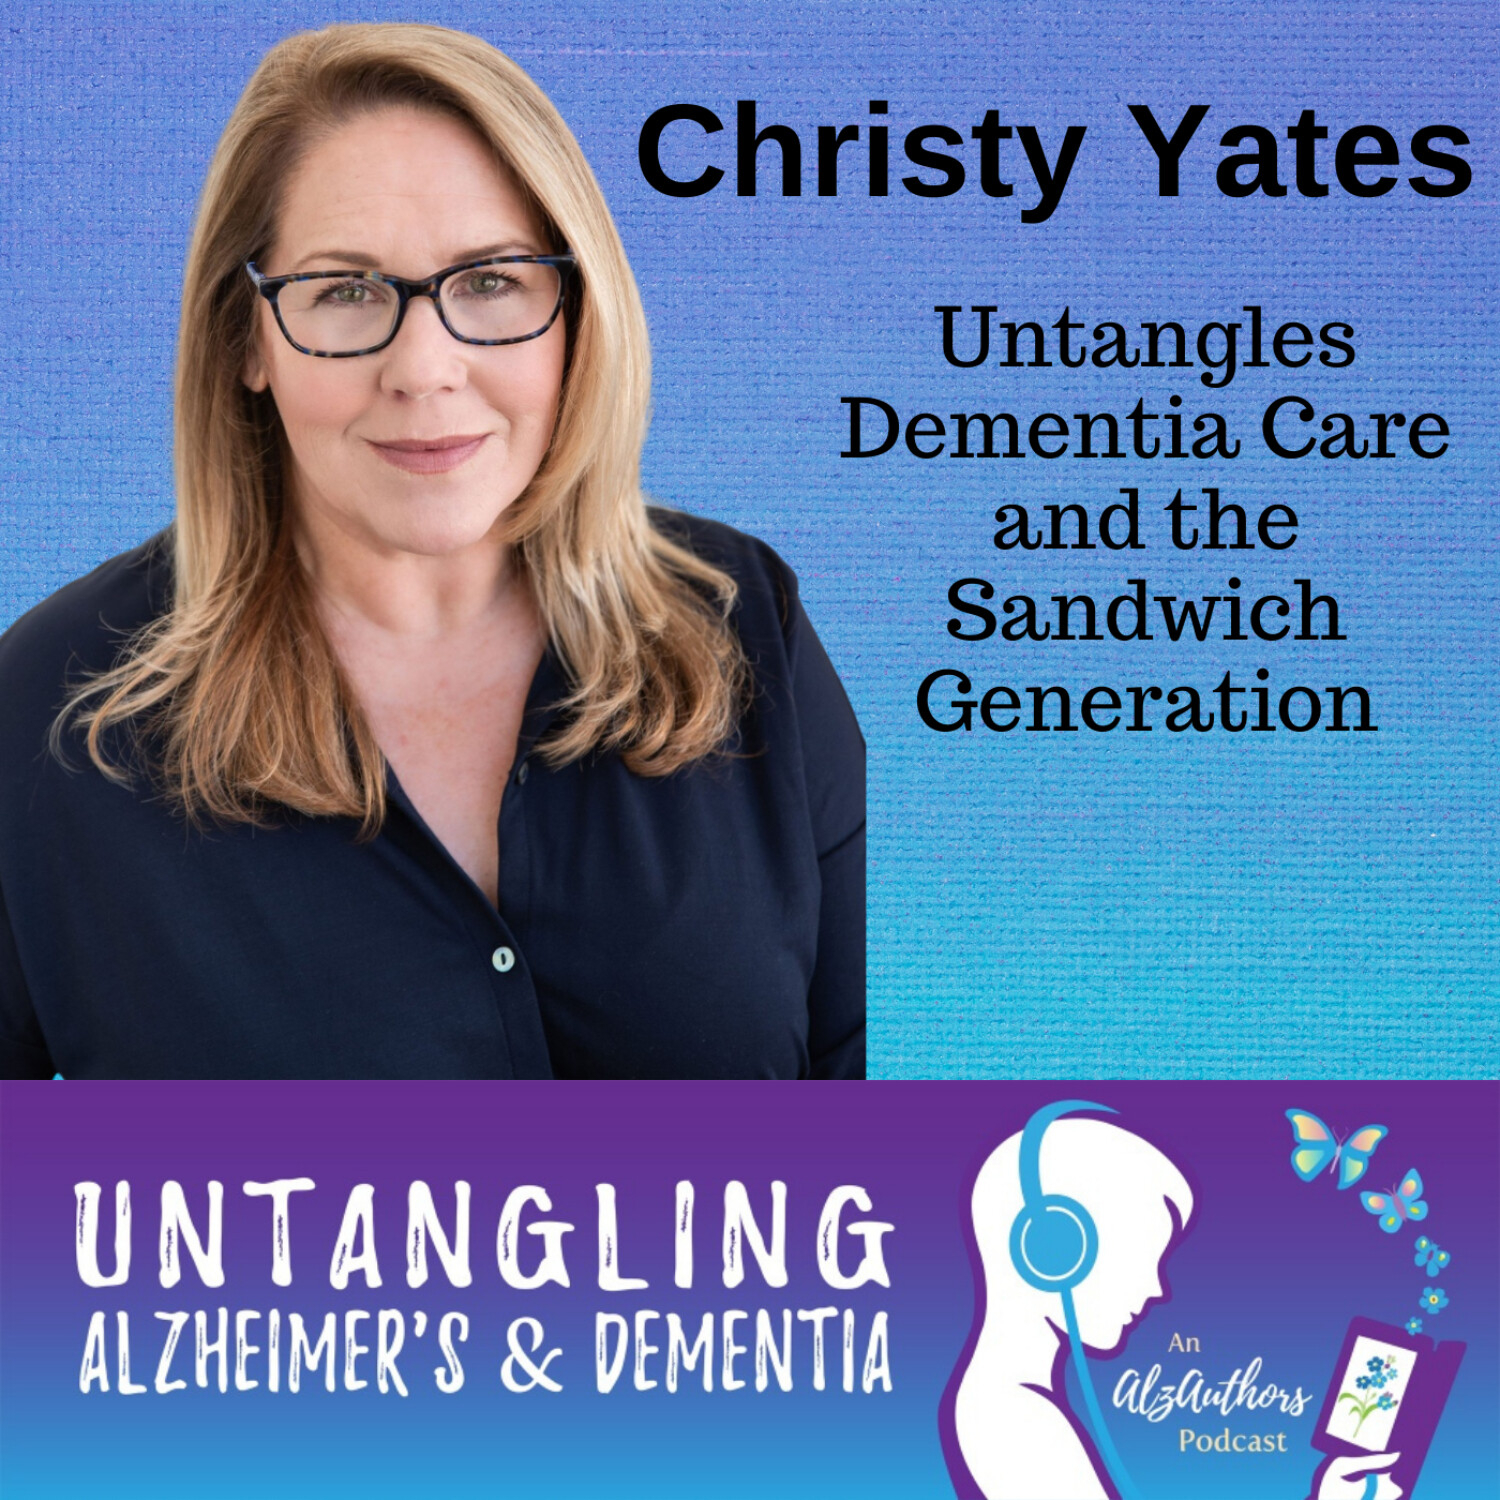 Christy Byrne Yates, MS Untangles Dementia Care and the Sandwich Generation